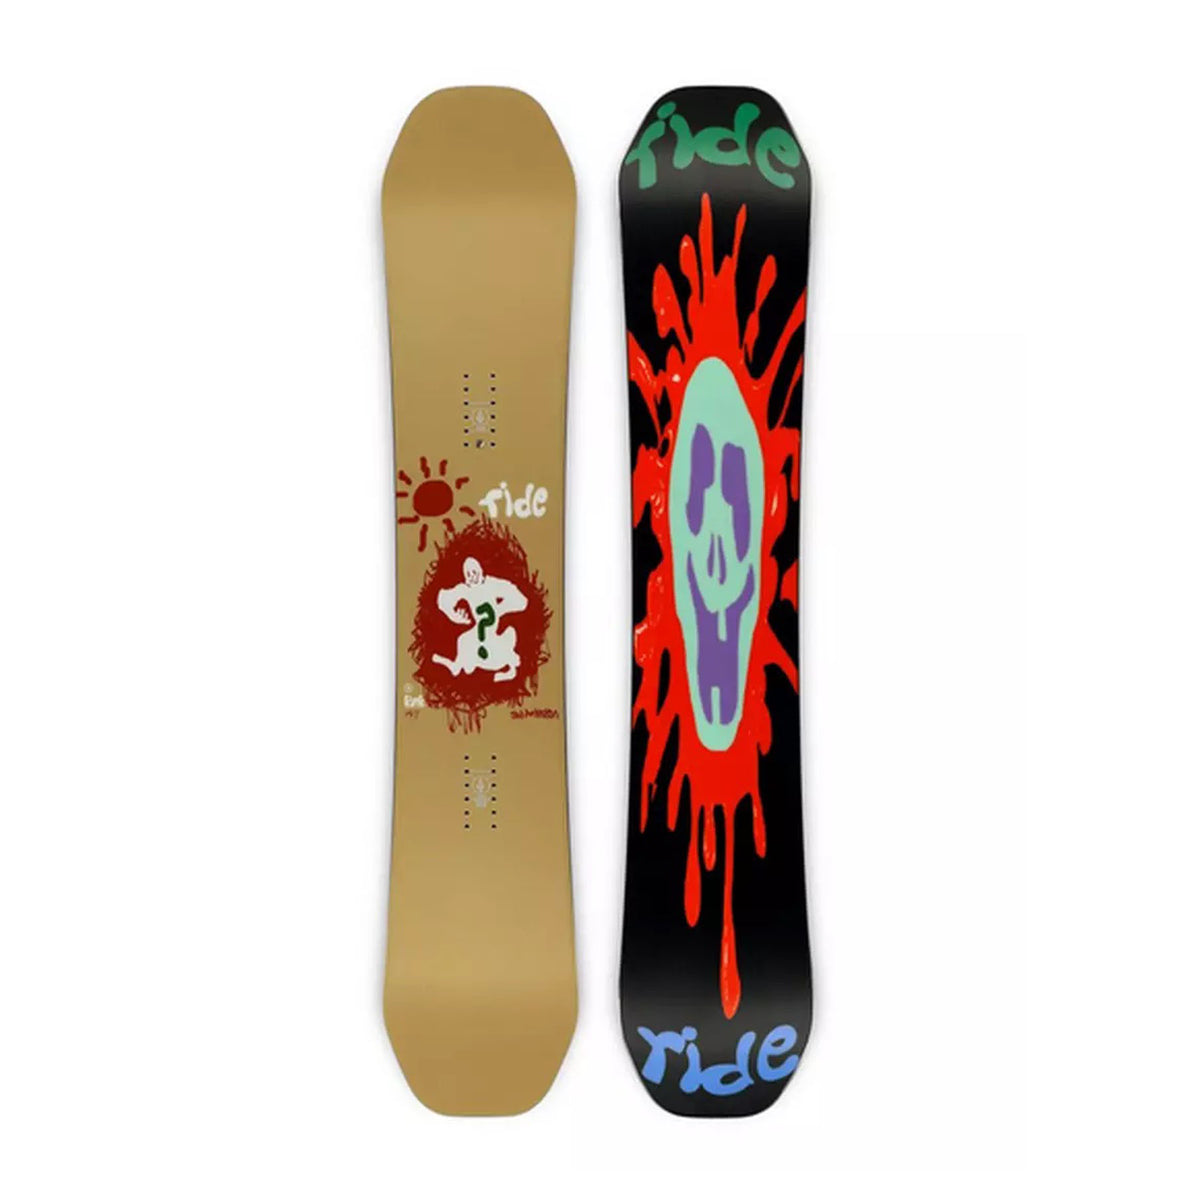 Hero image featuring the top and bottom of the Ride Kink snowboard with a gold deck and a black bottom with green and blue Ride logos.